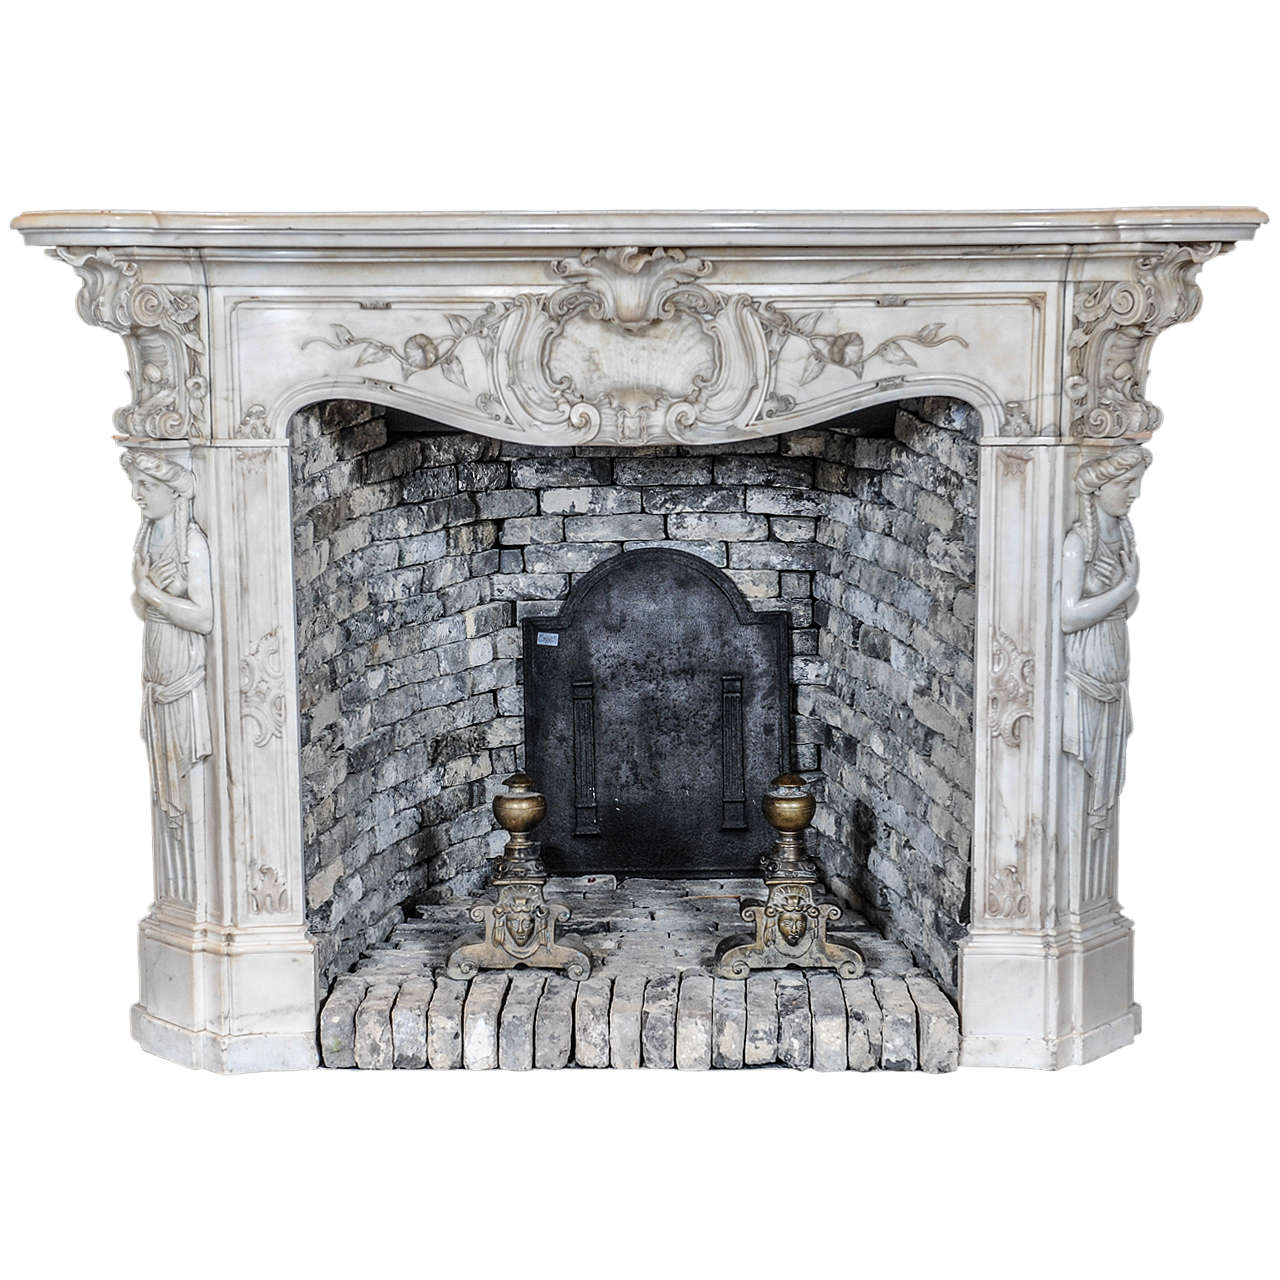 Carved 19th Century French Rococo Statuario Marble Fireplace or Mantel Piece